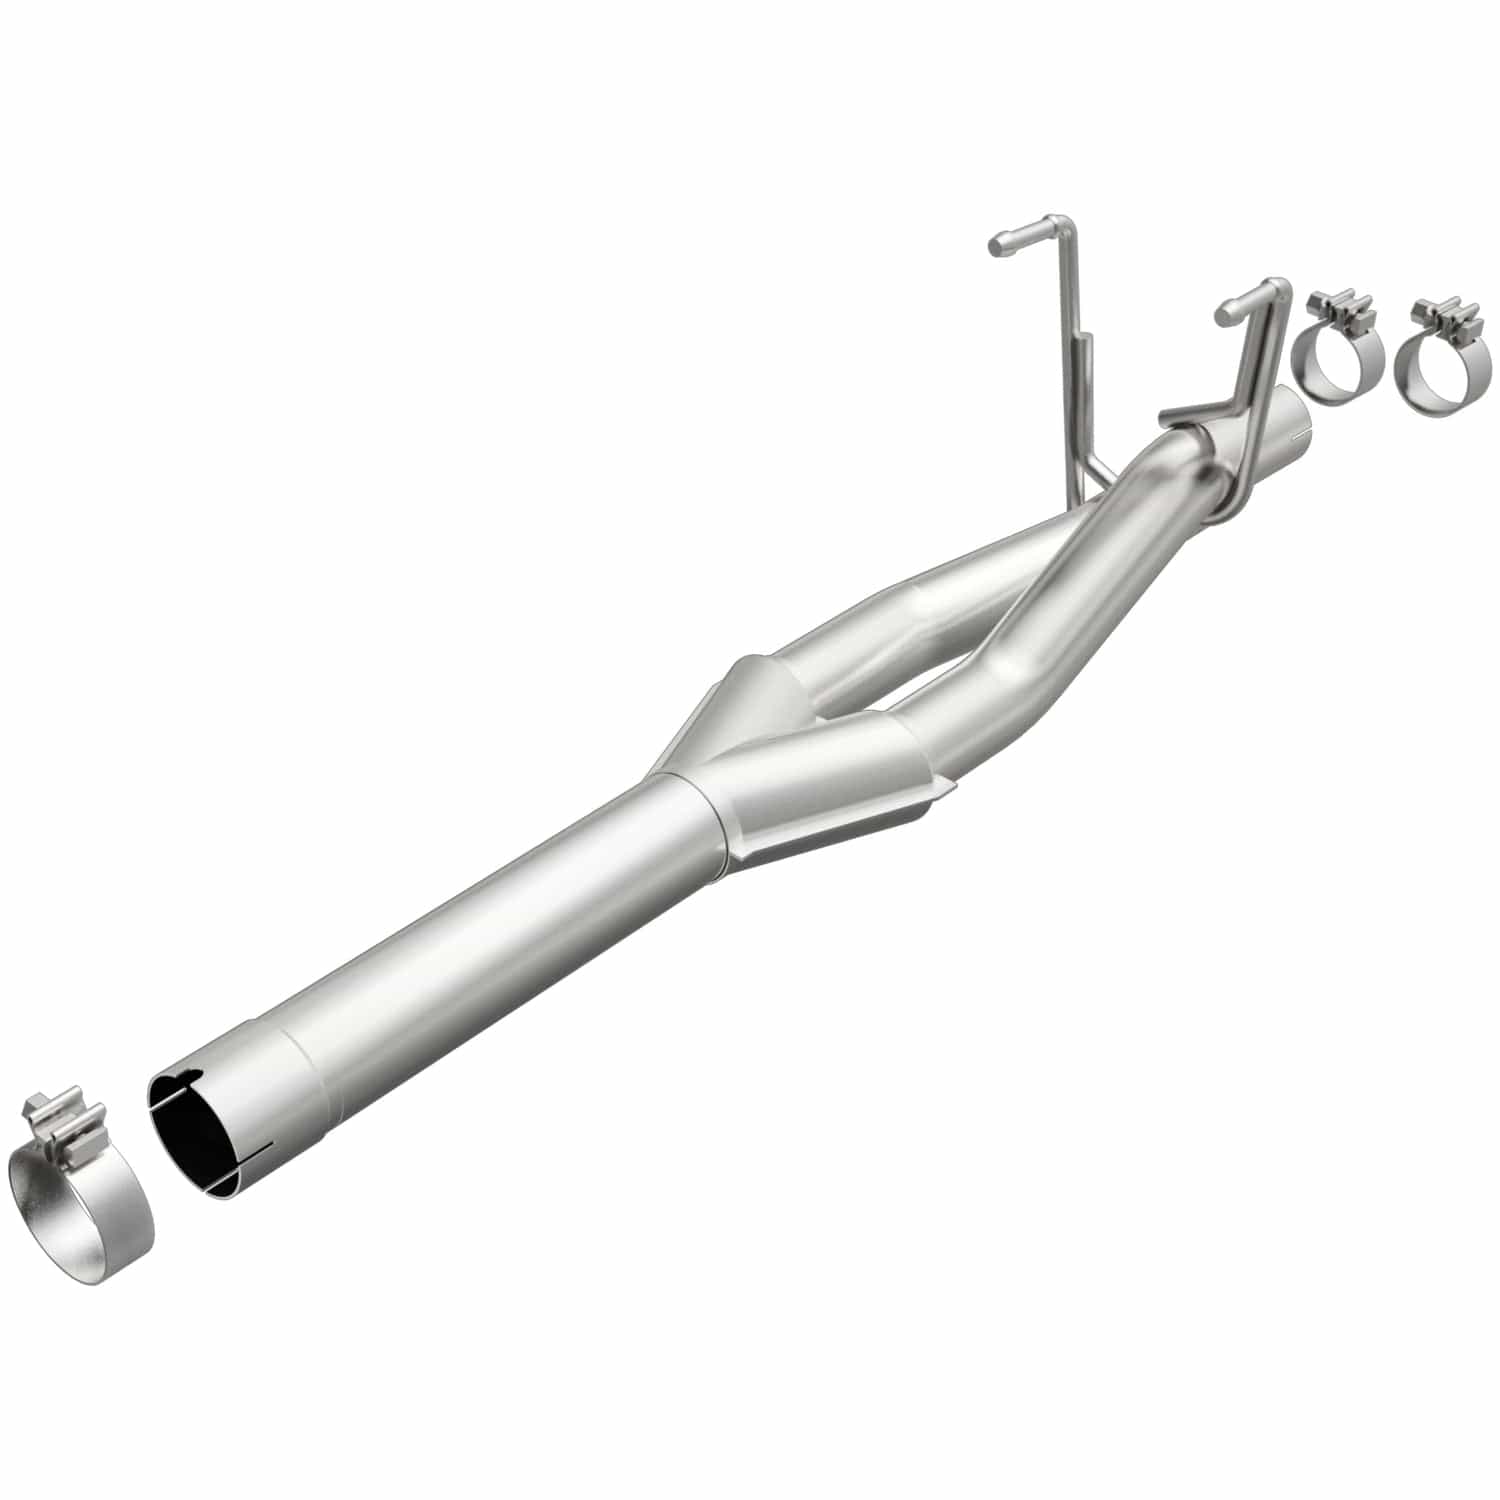 Muffler Delete: What is it for?